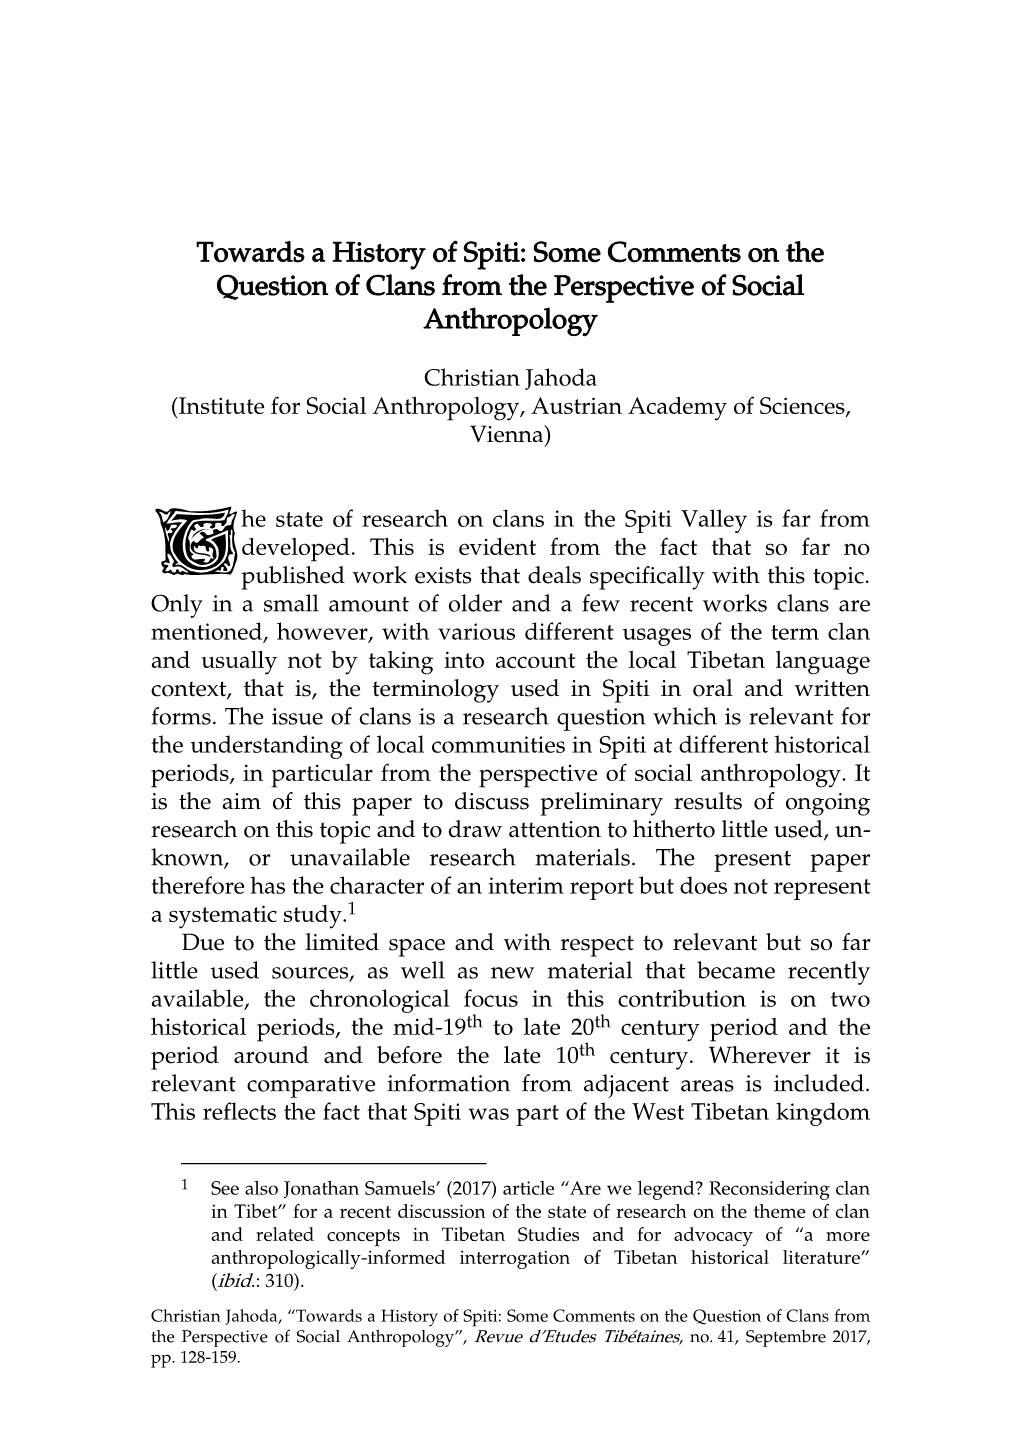 Towards a History of Spiti: Some Comments on the Question of Clans from the Perspective of Social Anthropology